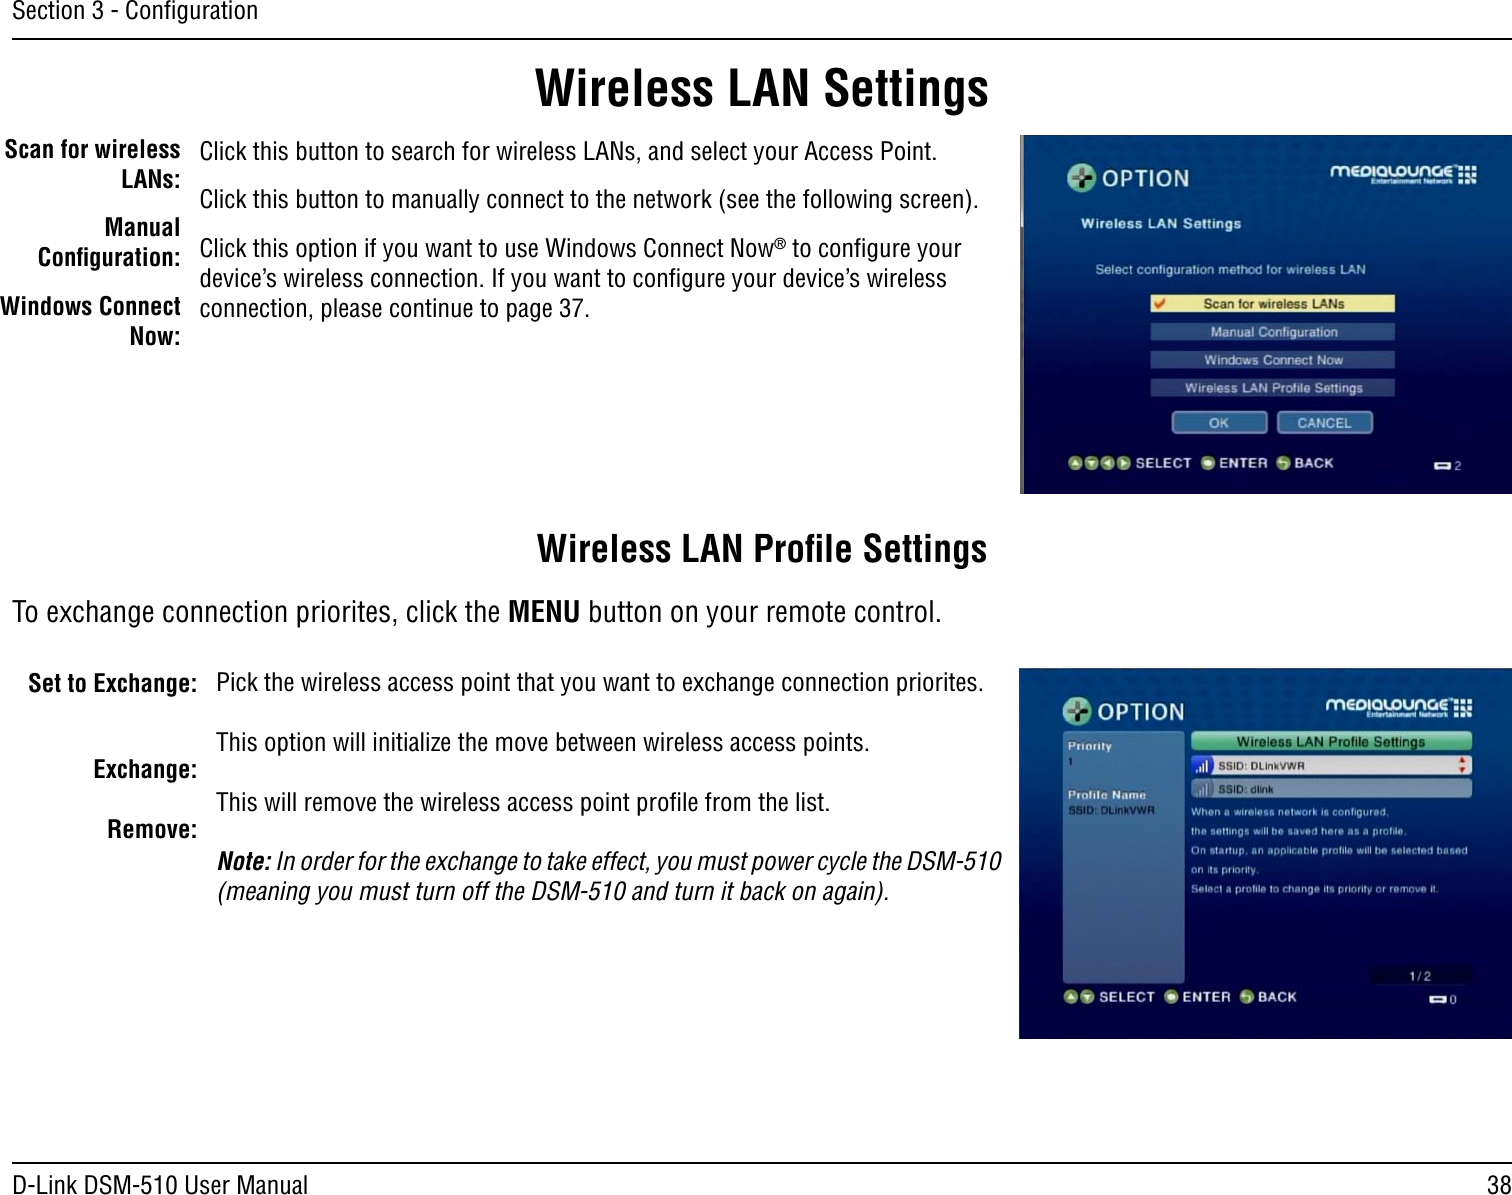 38D-Link DSM-510 User ManualSection 3 - ConﬁgurationWireless LAN SettingsScan for wireless LANs:Manual Conﬁguration:Windows Connect Now:Click this button to search for wireless LANs, and select your Access Point.Click this button to manually connect to the network (see the following screen).Click this option if you want to use Windows Connect Now® to conﬁgure your device’s wireless connection. If you want to conﬁgure your device’s wireless connection, please continue to page 37.Set to Exchange:Exchange:Remove:Pick the wireless access point that you want to exchange connection priorites.This option will initialize the move between wireless access points.This will remove the wireless access point proﬁle from the list.Note: In order for the exchange to take effect, you must power cycle the DSM-510 (meaning you must turn off the DSM-510 and turn it back on again). Wireless LAN Proﬁle SettingsTo exchange connection priorites, click the MENU button on your remote control.